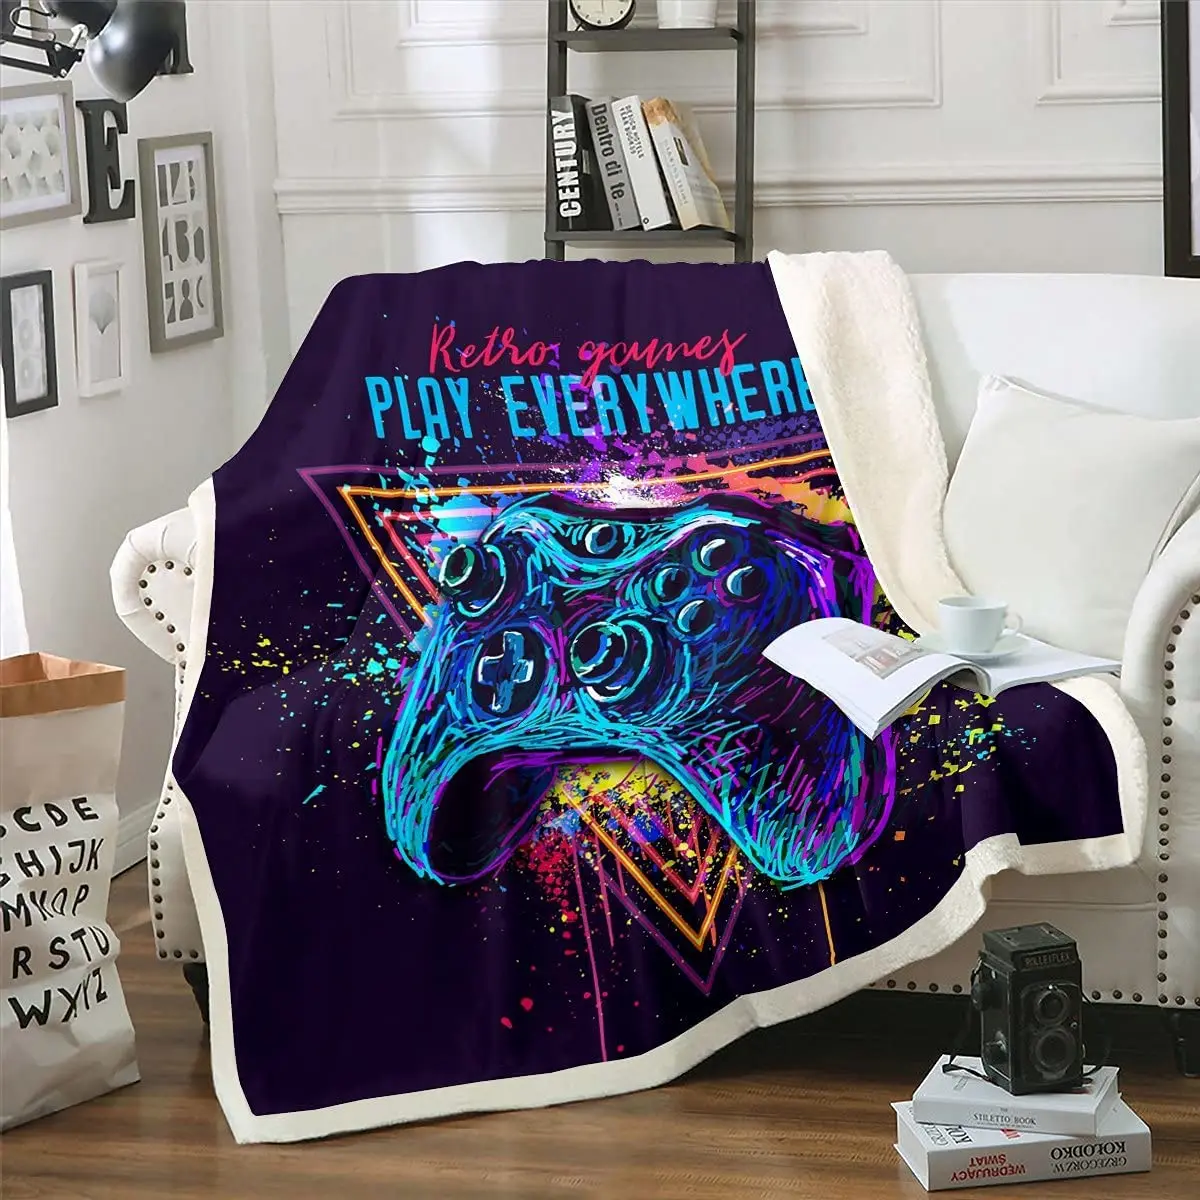 

Gamer Throw Blanket Gamepad Bed Throws for Kids Boys Teens Games Flannel Fleece Blanket for Couch Sofa Cozy Luxury Bed Blankets